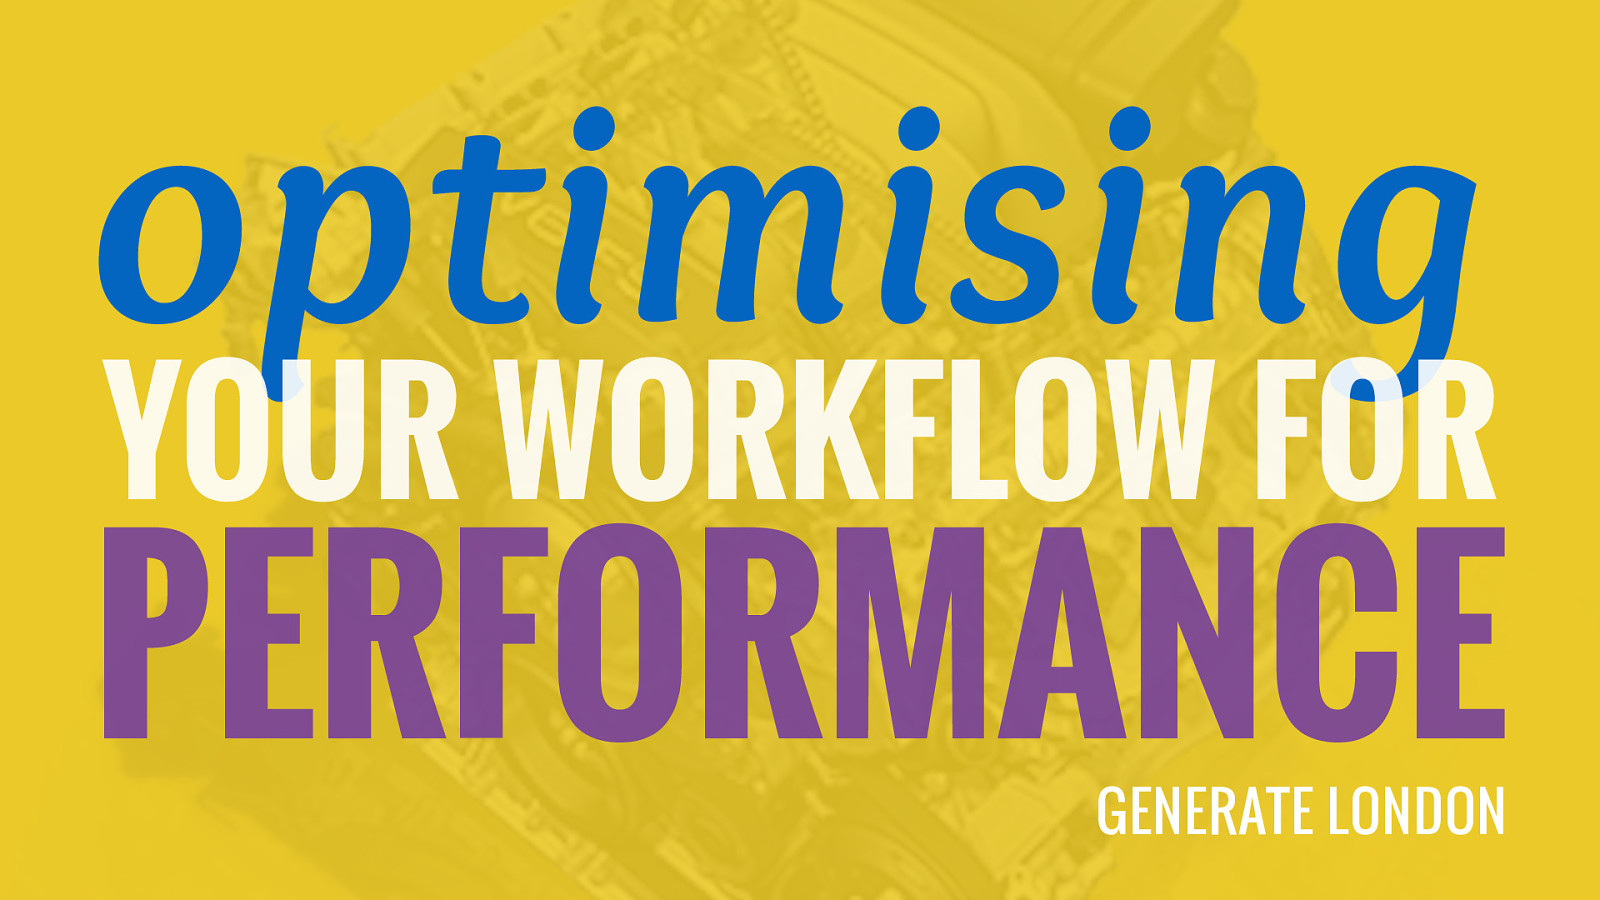 Optimising your workflow for performance